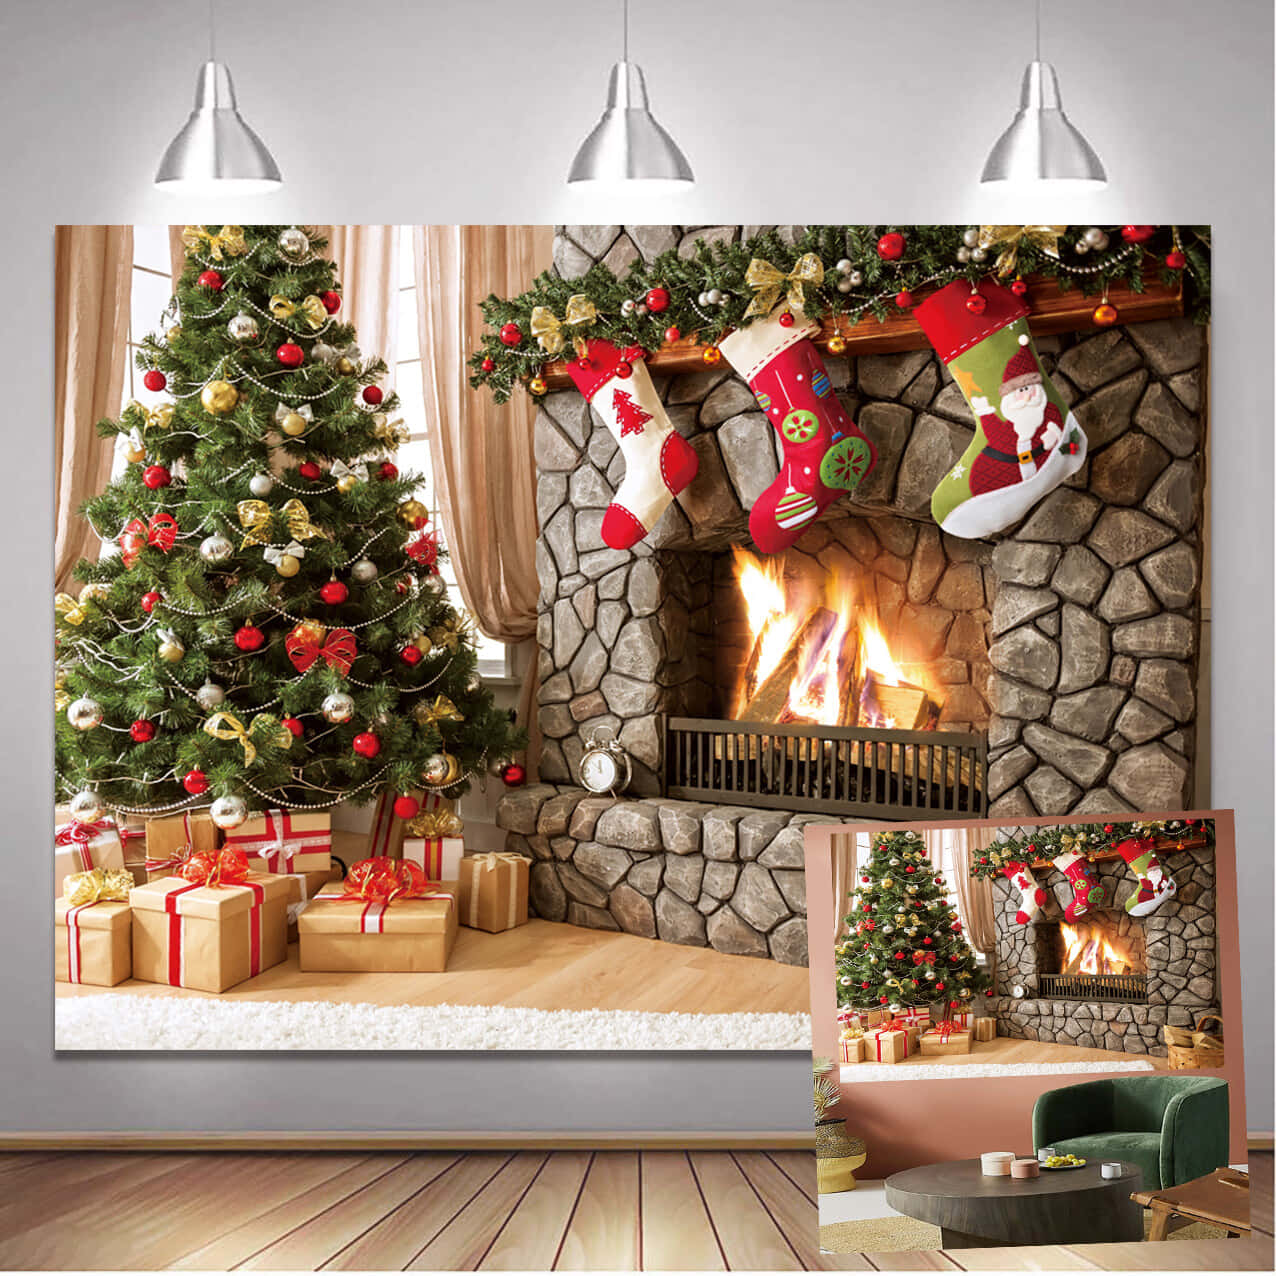 Caption: Cozy Winter Fantasy With Crackling Fireplace